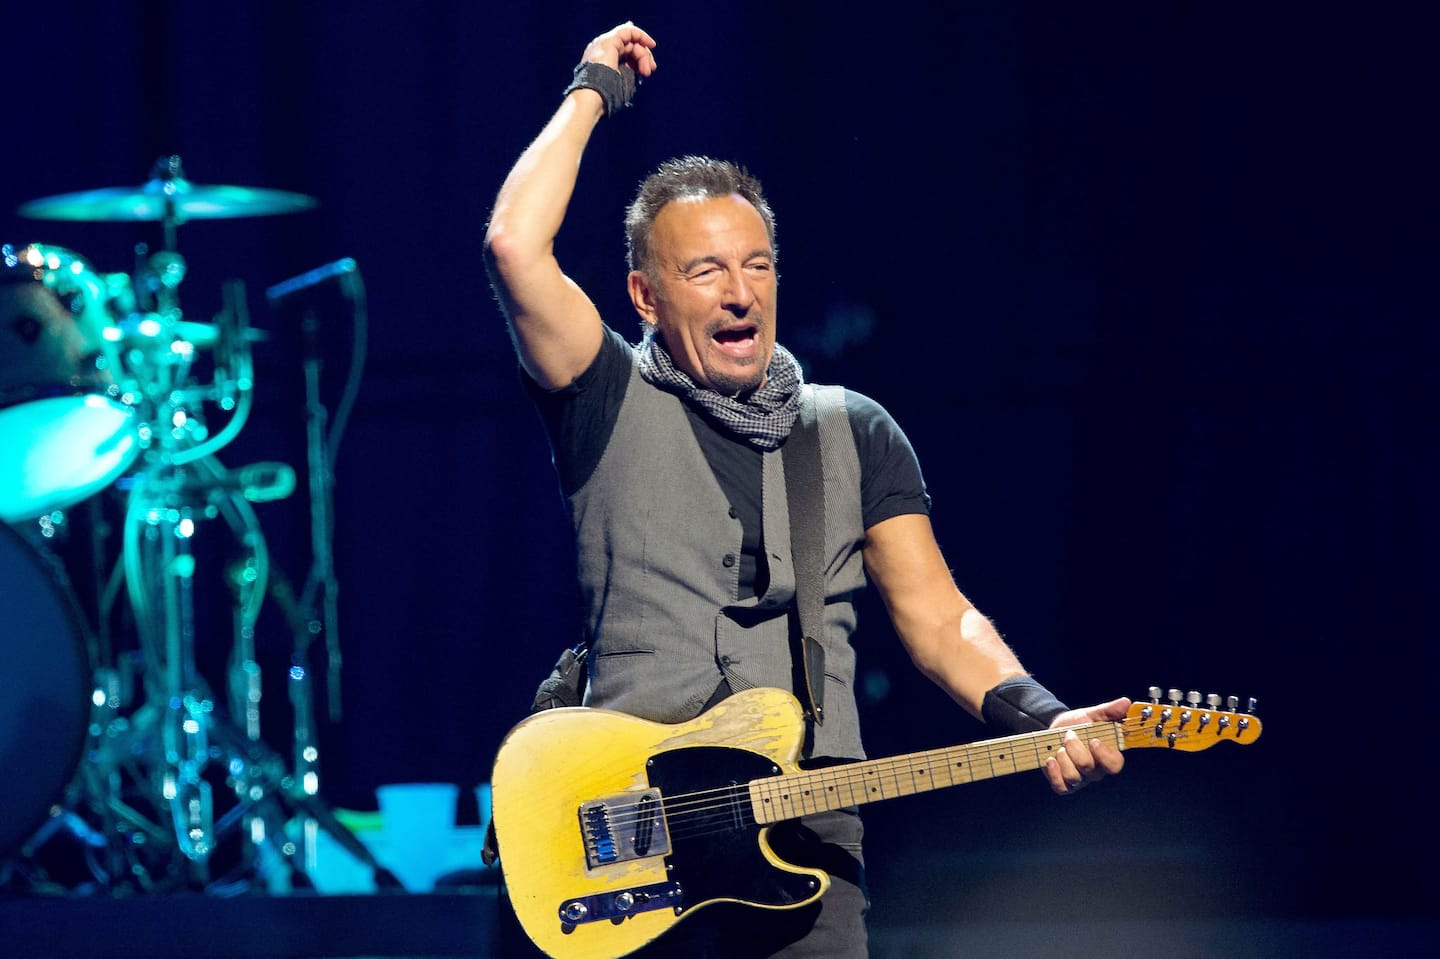 50 years ago, Bruce Springsteen emerged from anonymity